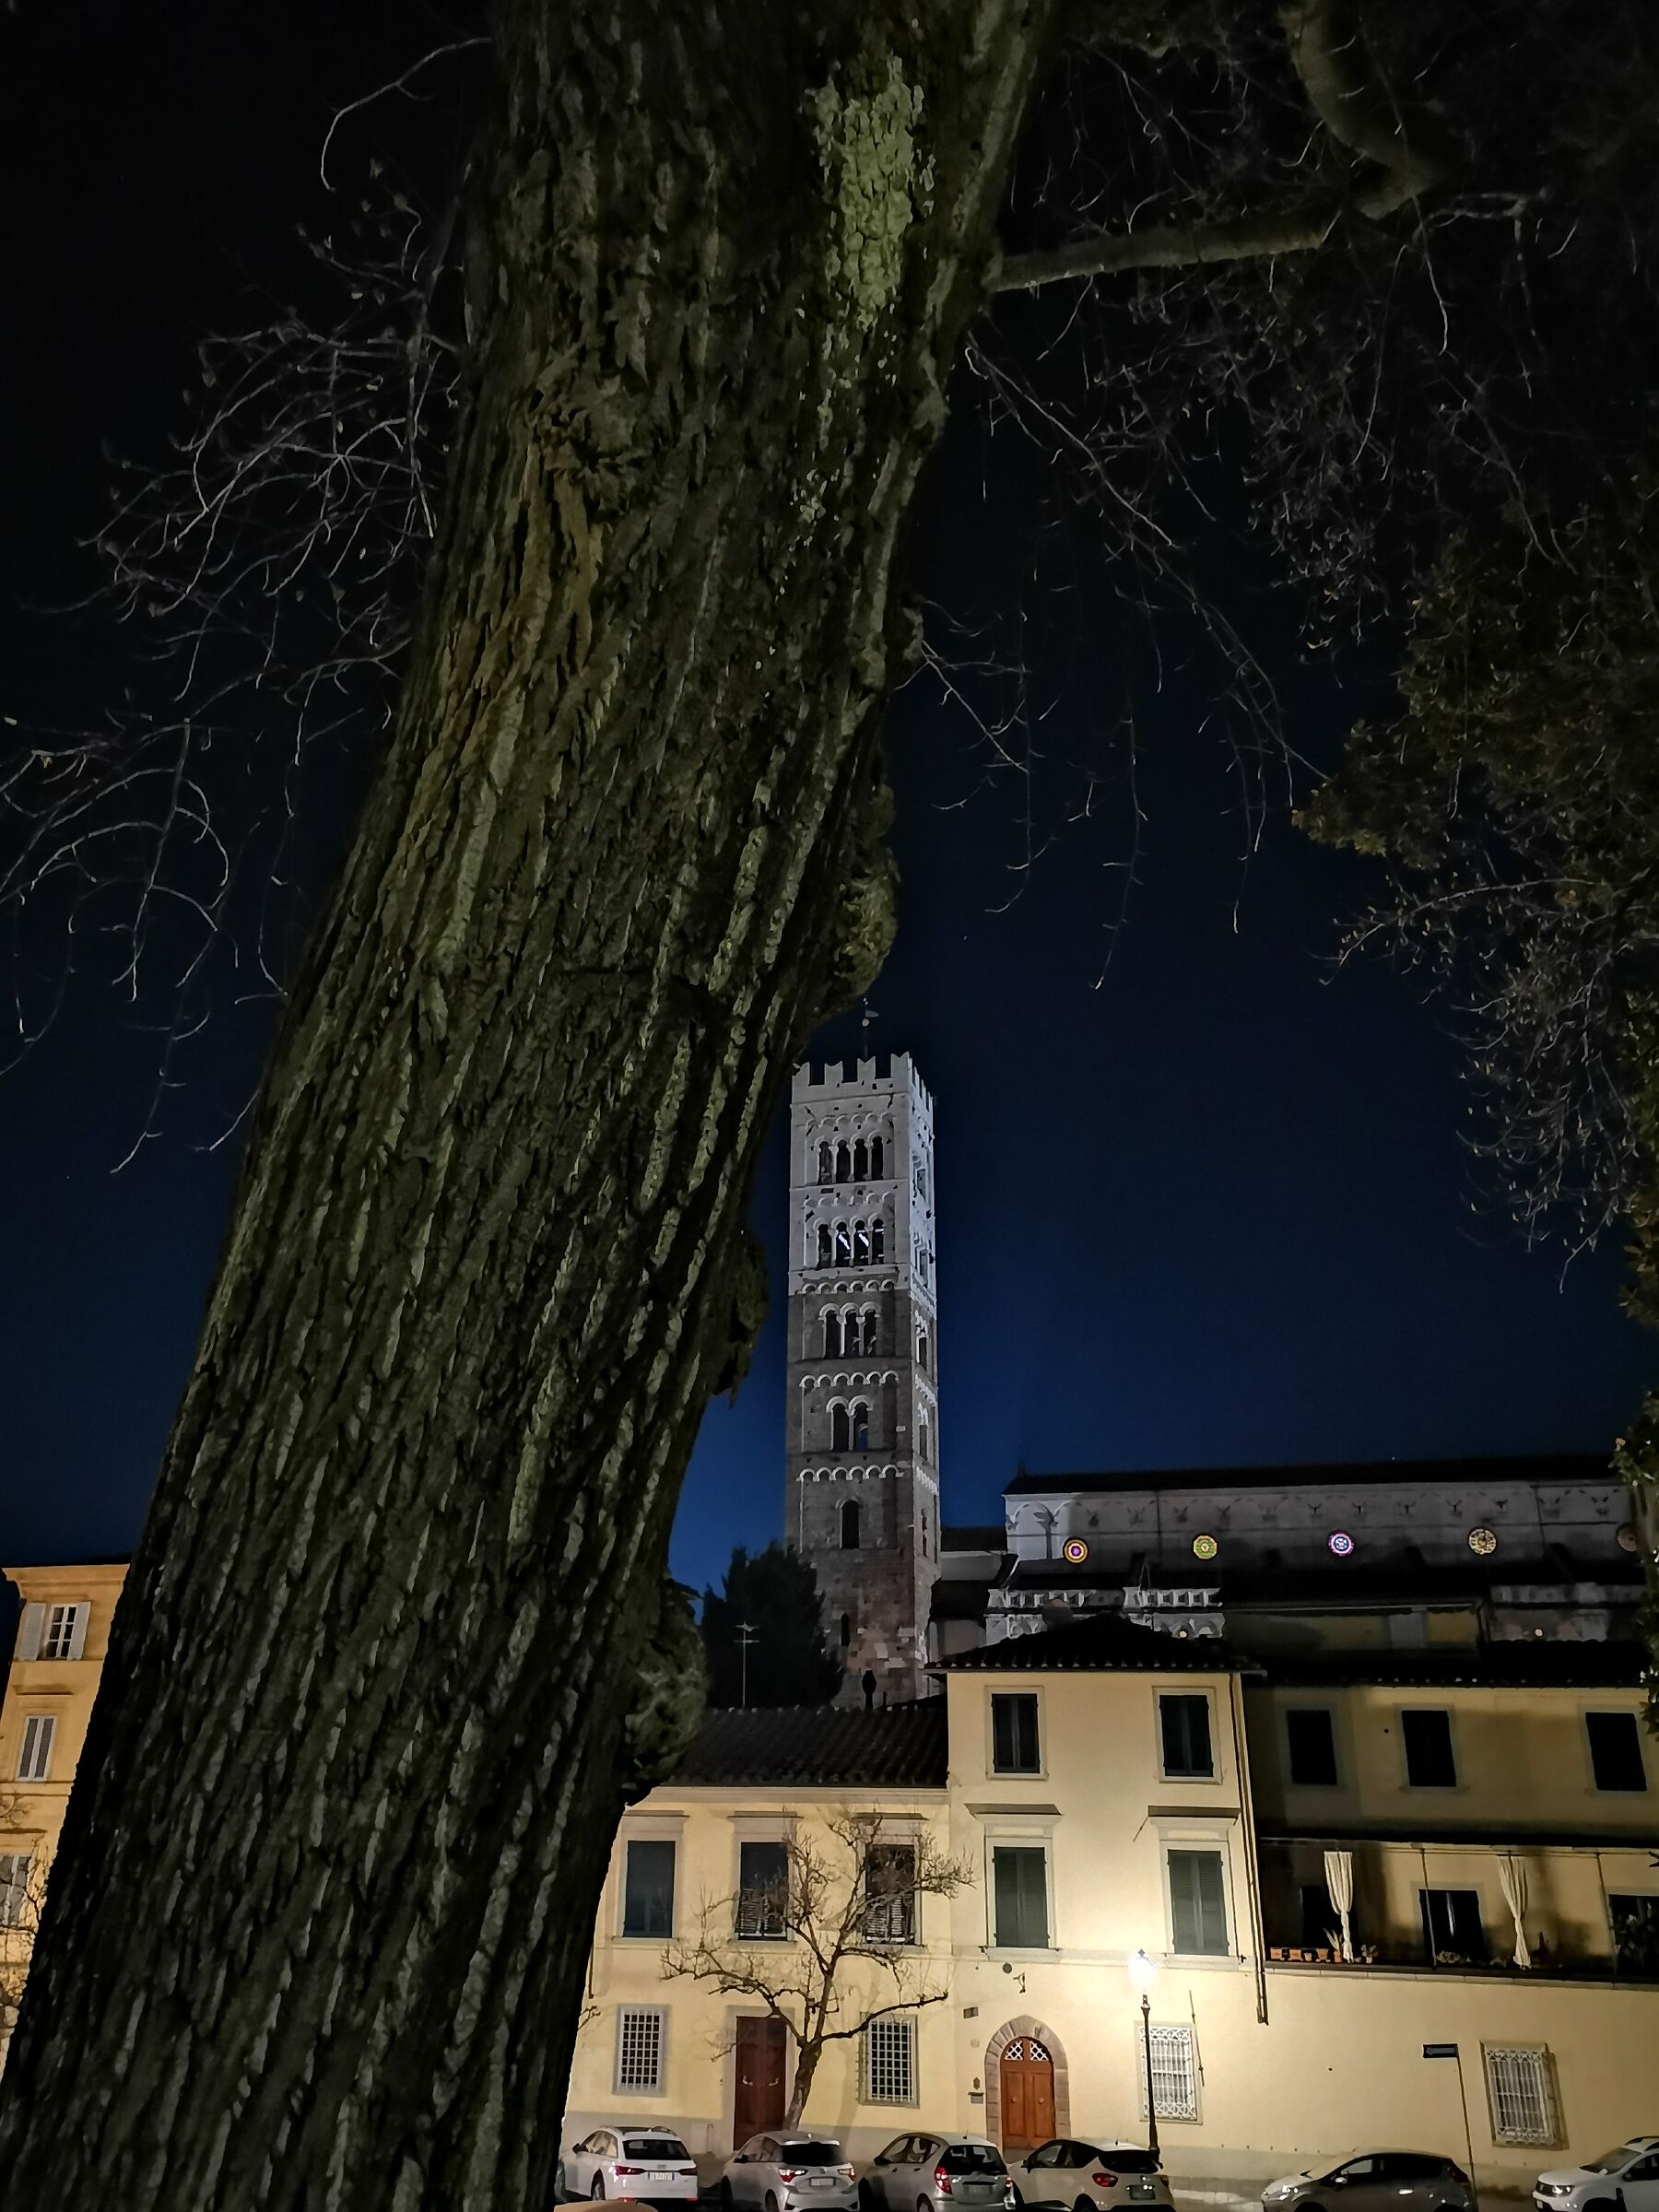 Lucca at night...